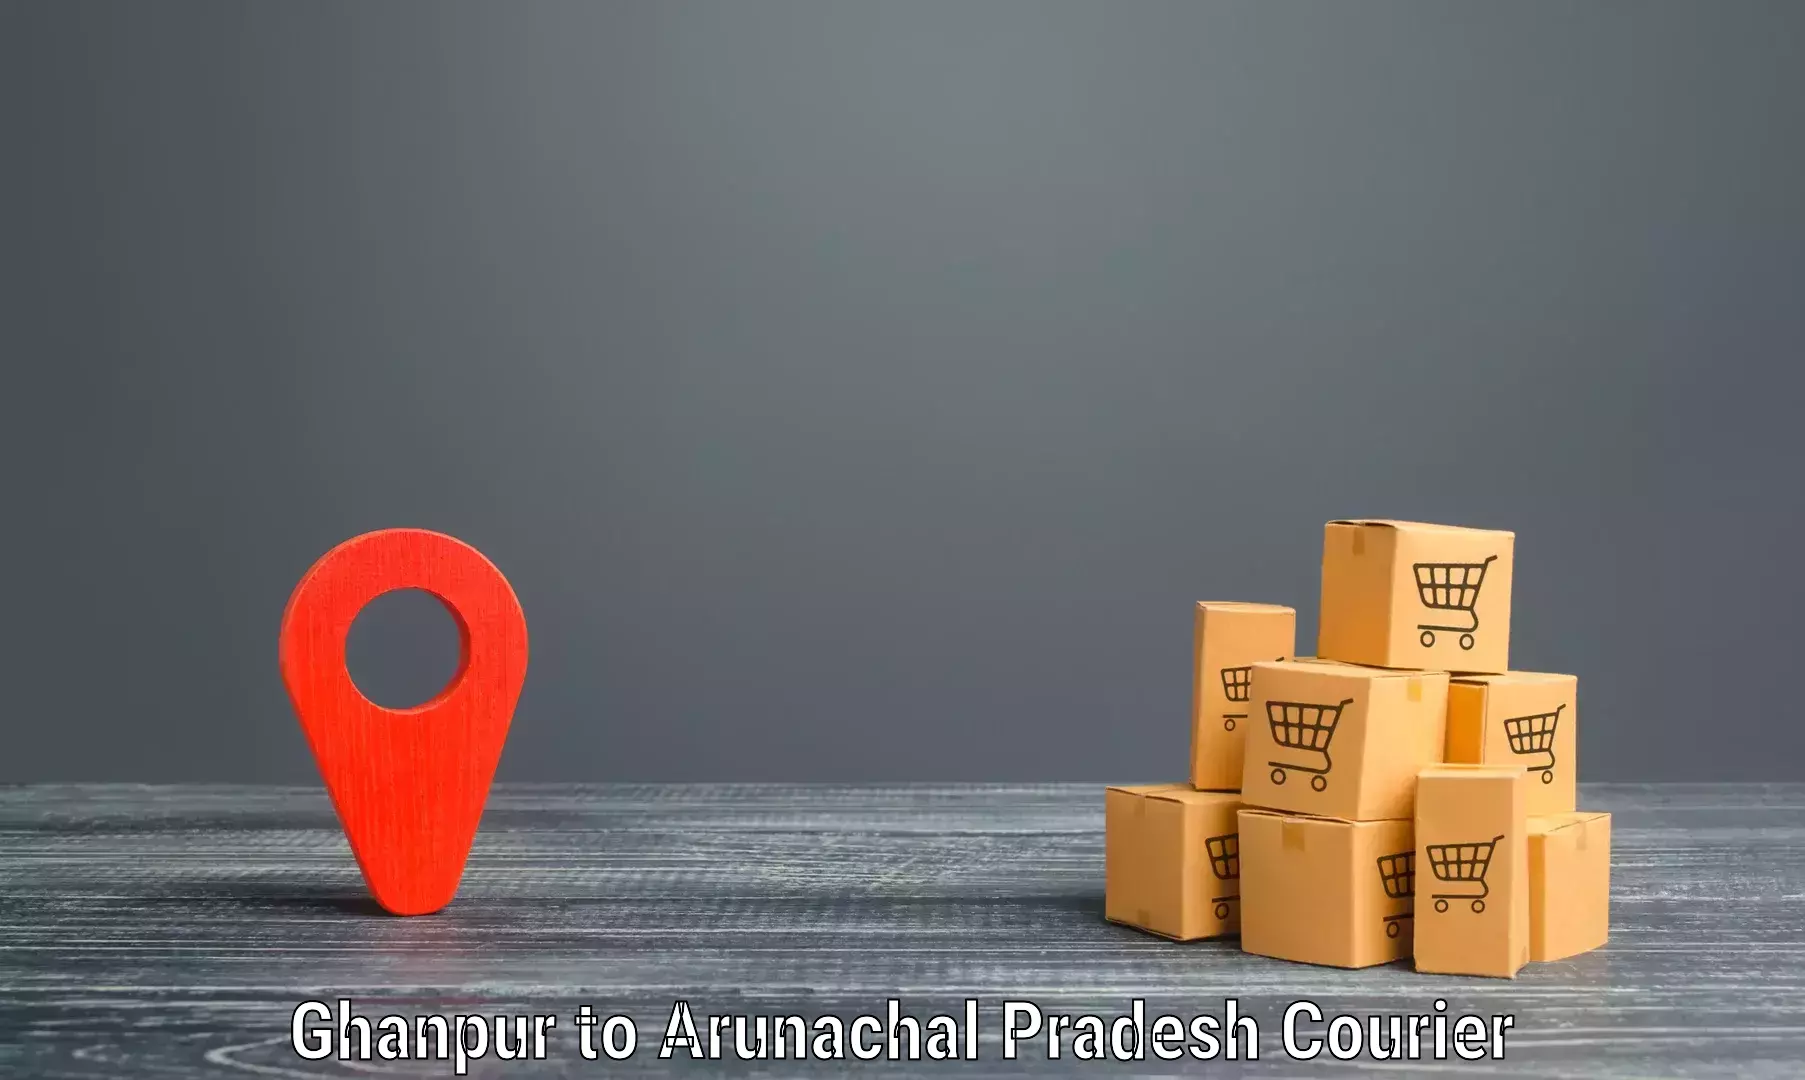 International courier networks Ghanpur to Pasighat